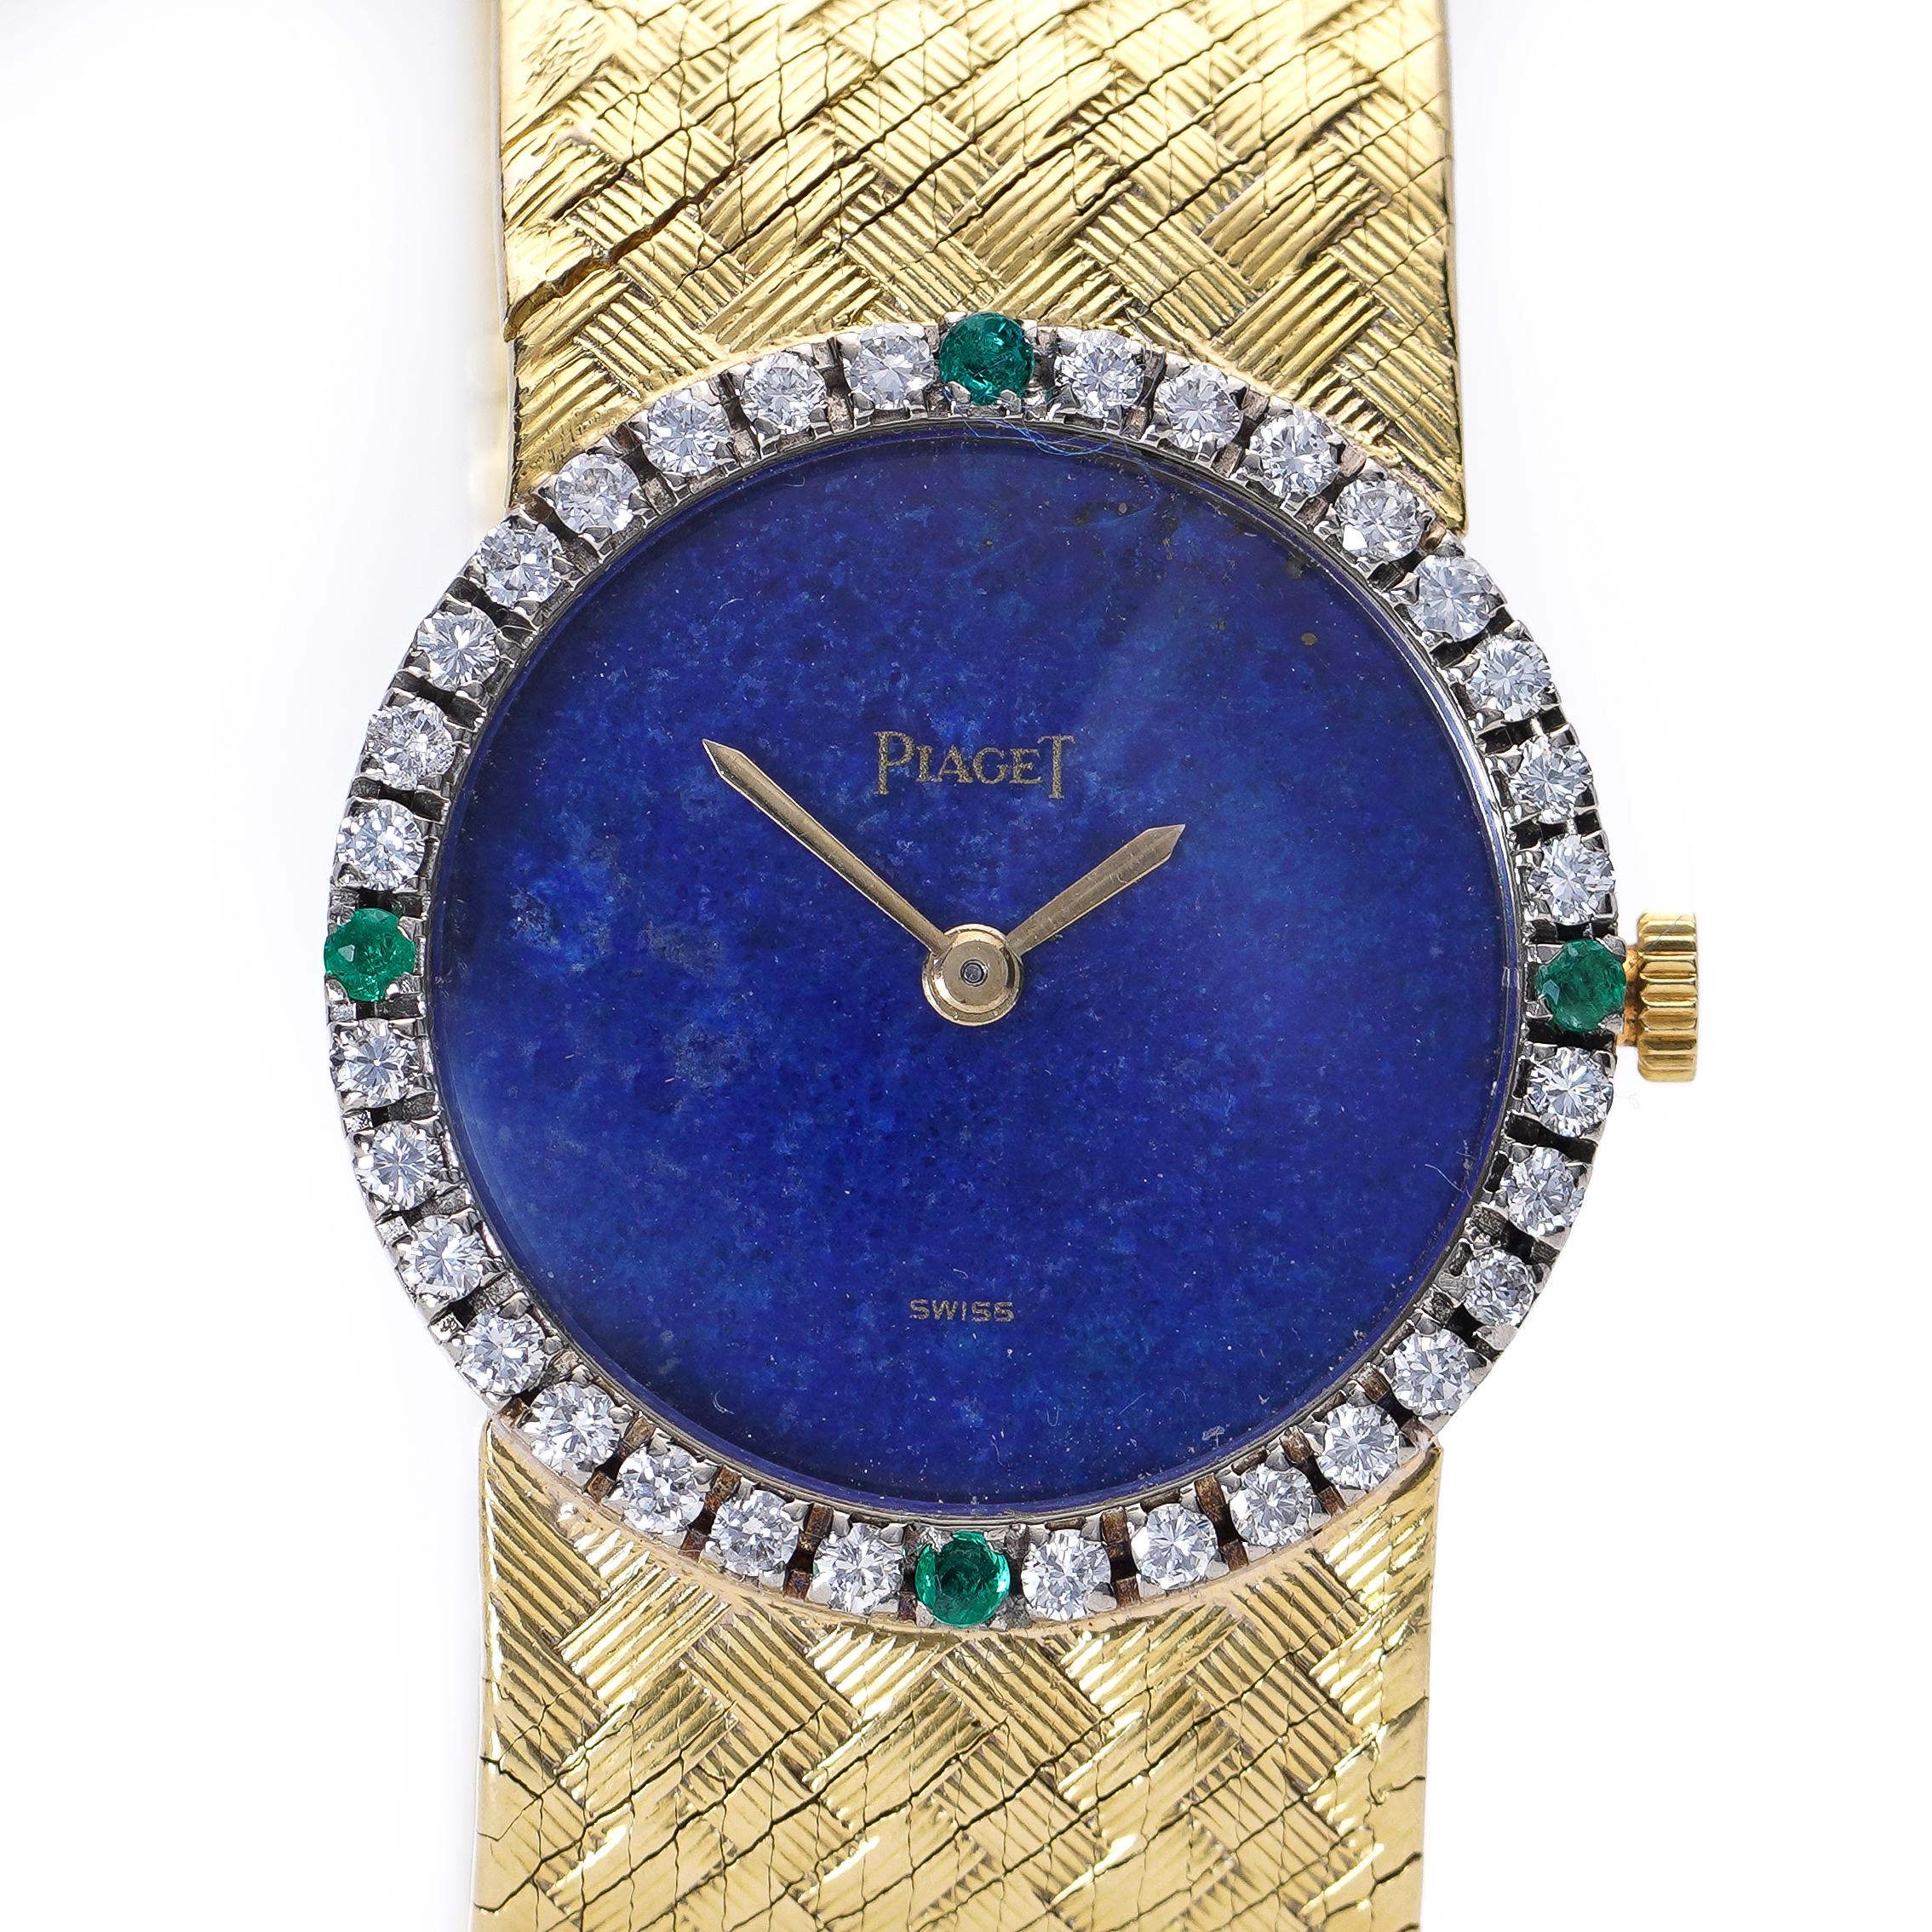 Piaget 18kt. Yellow and white Gold Lapis Lazuli Dial Diamond Emerald Vintage Cocktail Watch 926B23

Piaget is a luxury Swiss watch and jewellery brand that has been creating some of the most beautiful and intricate timepieces in the world since